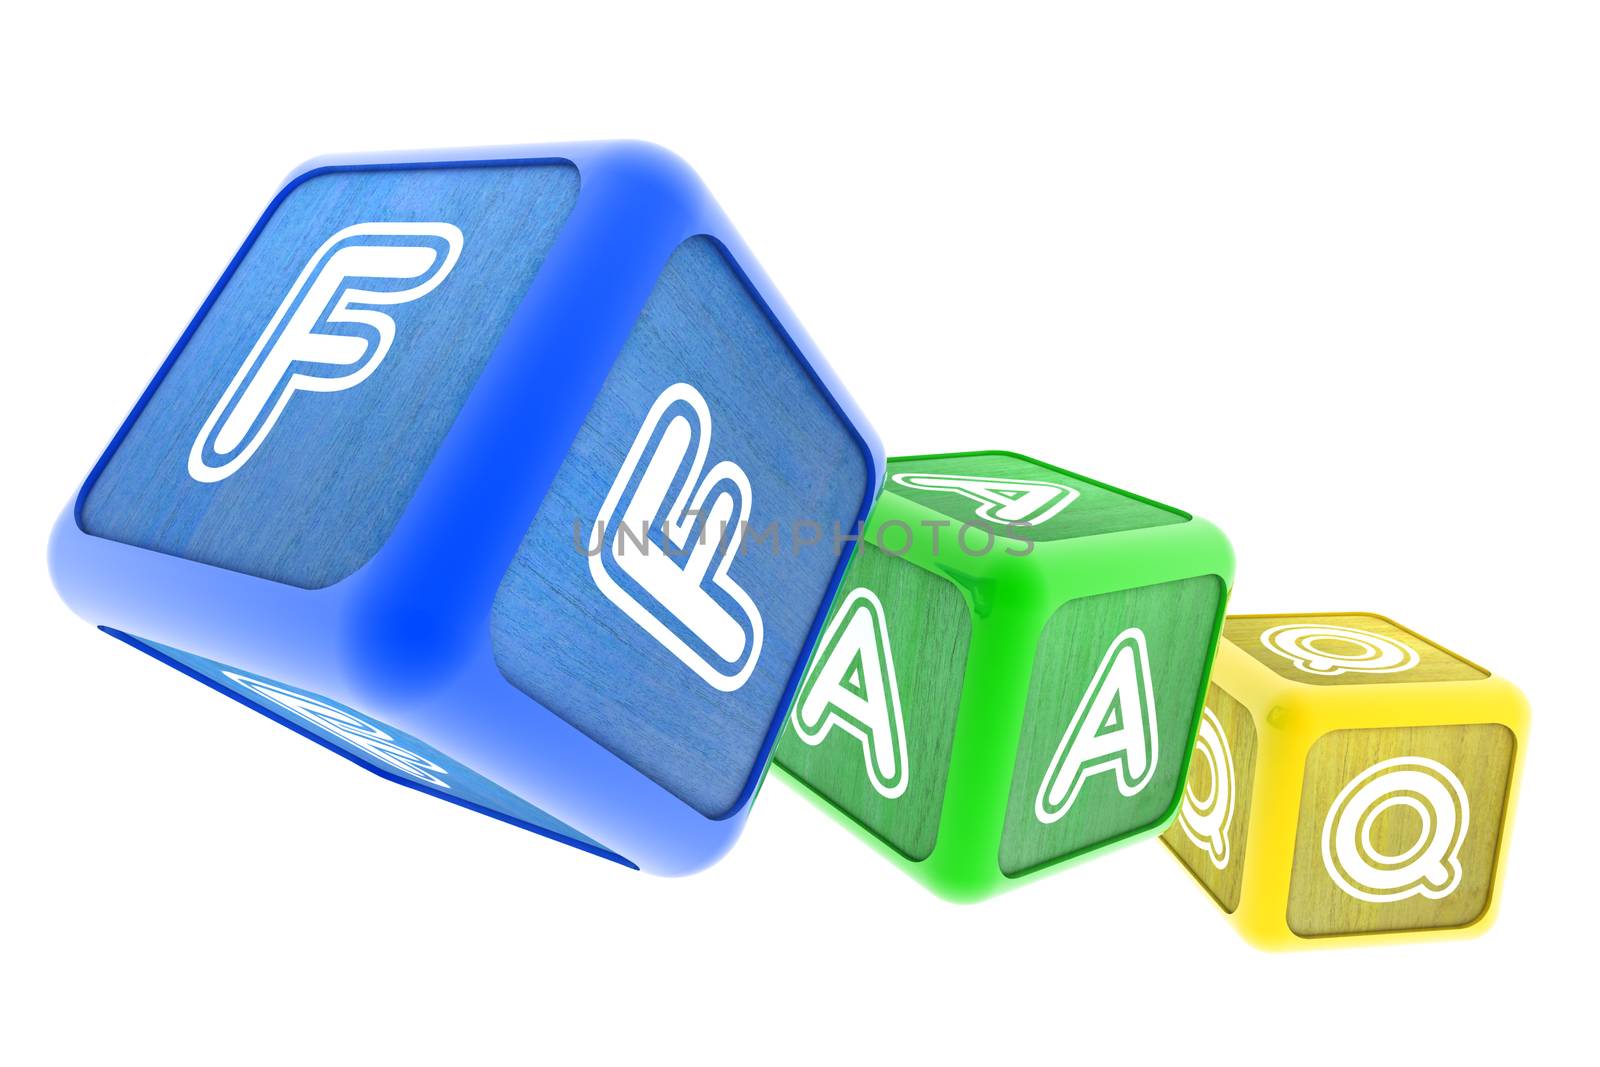 A Colourful 3d Rendered Illustration of FAQ Building Blocks